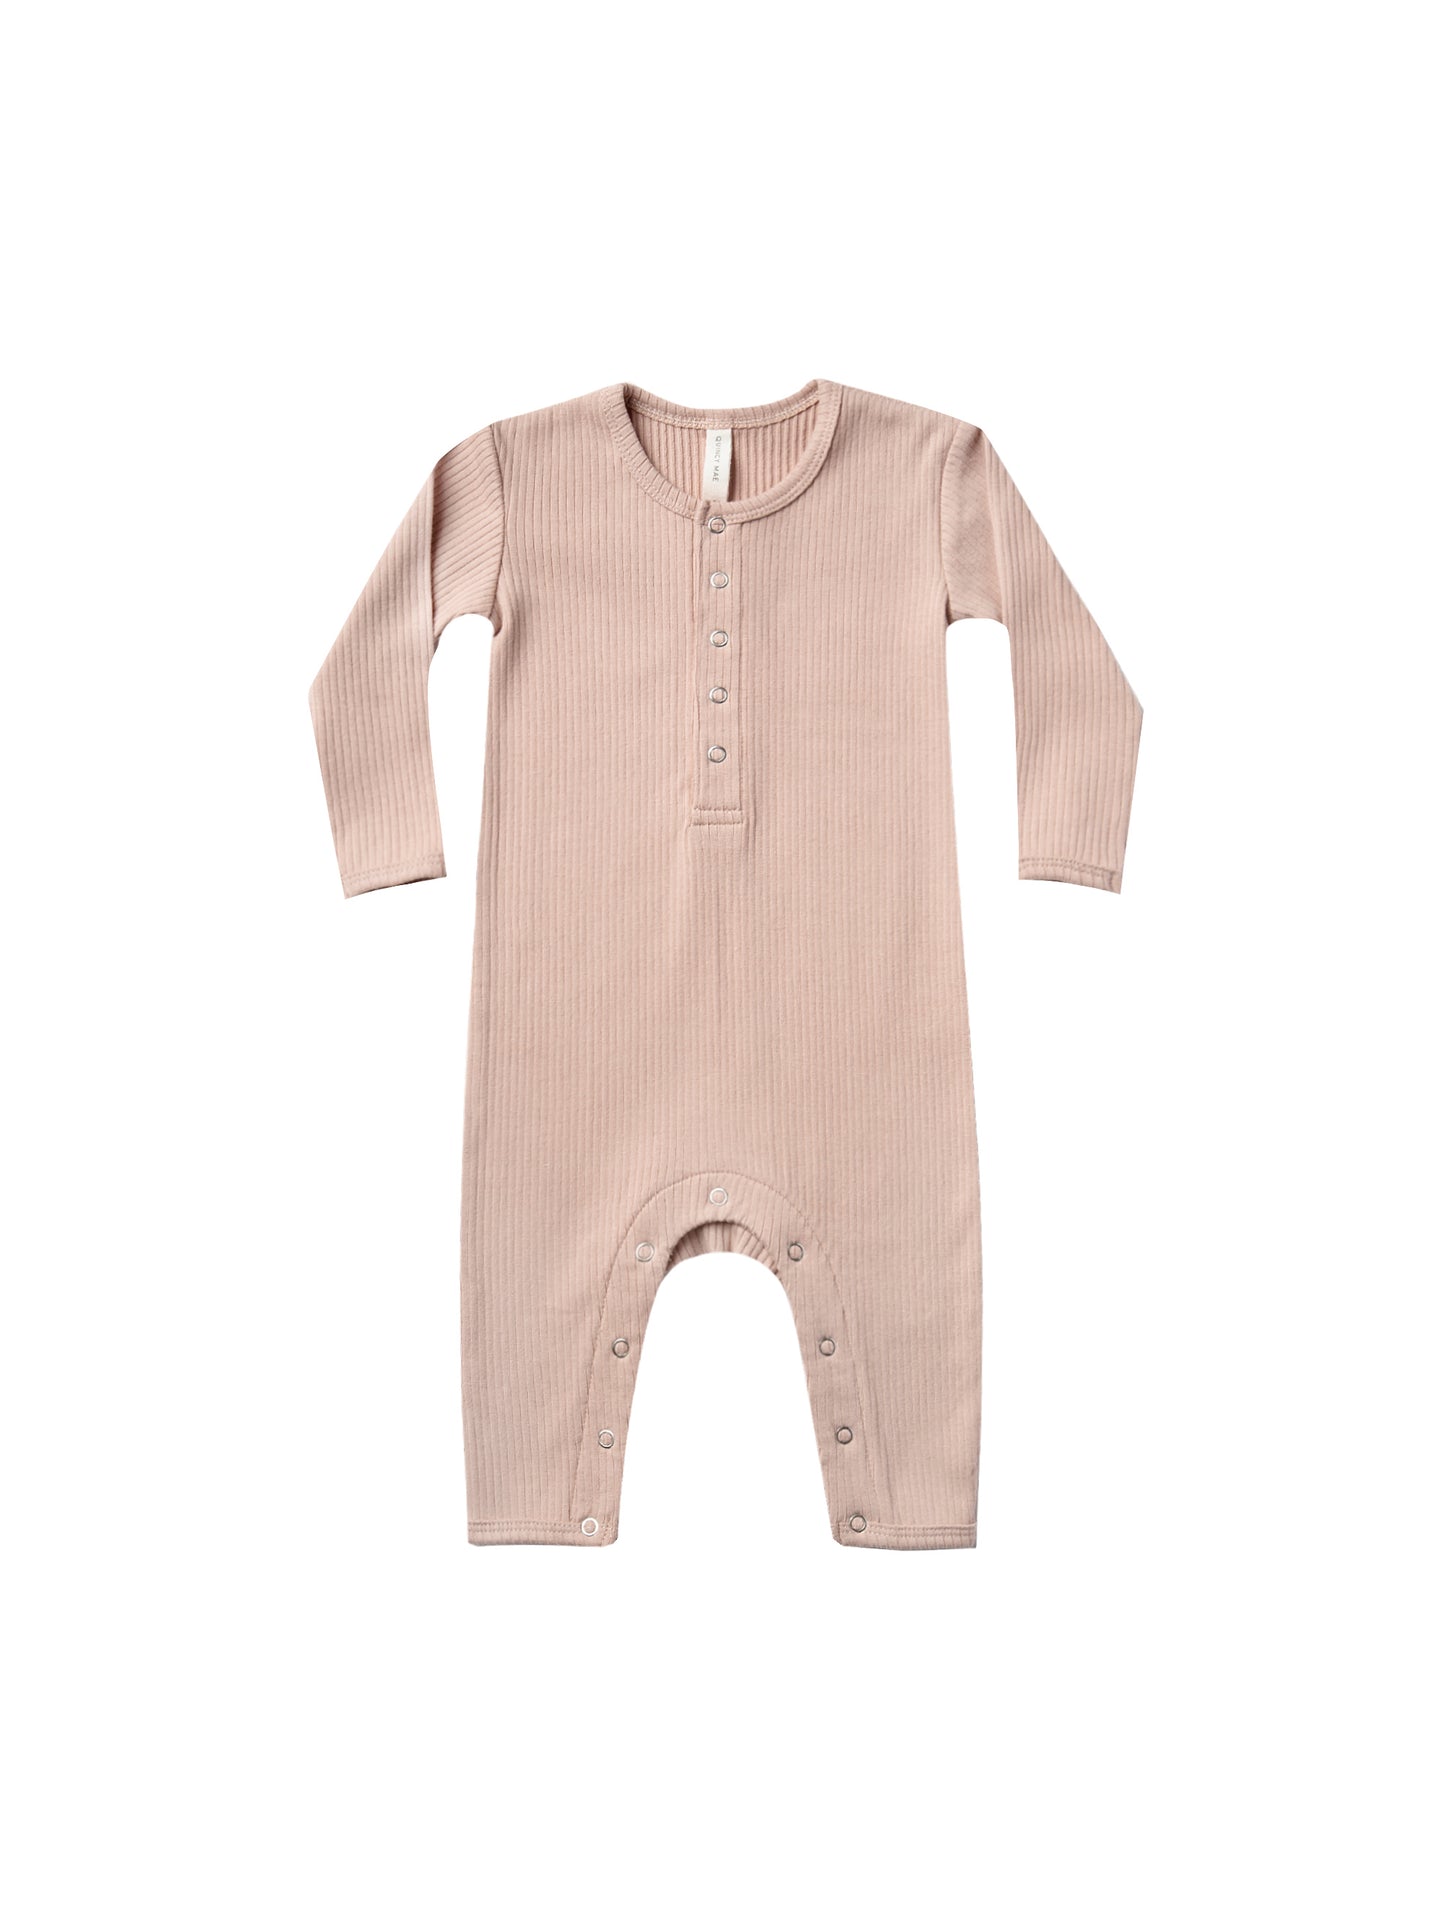 Quincy Mae Ribbed Baby Jumpsuit - Petal